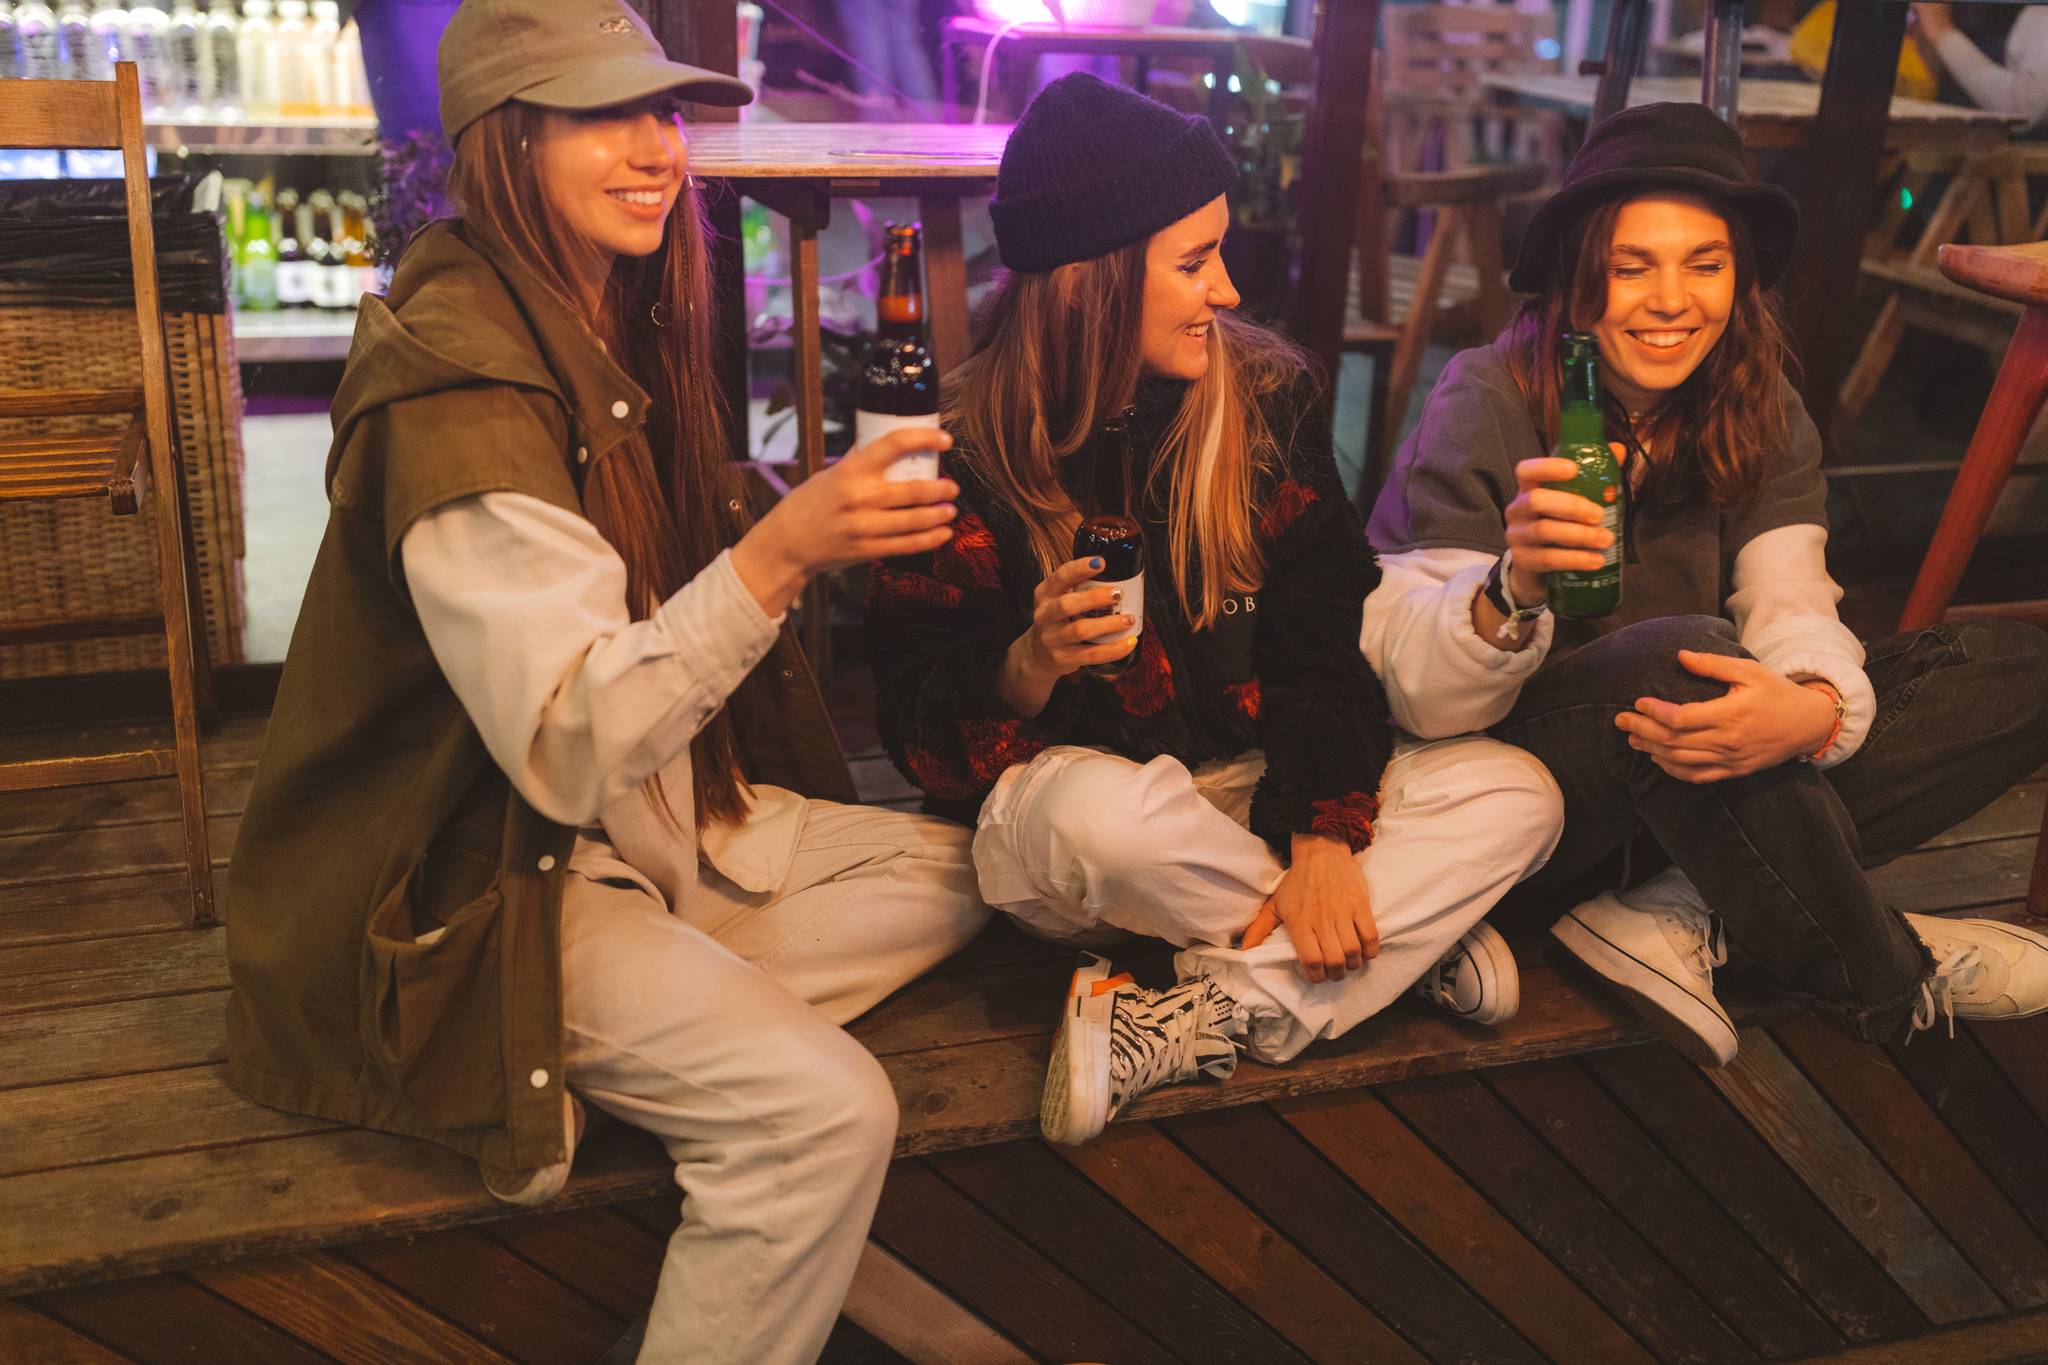 Cold Ones encourages alcohol-free but 'irresponsible' fun